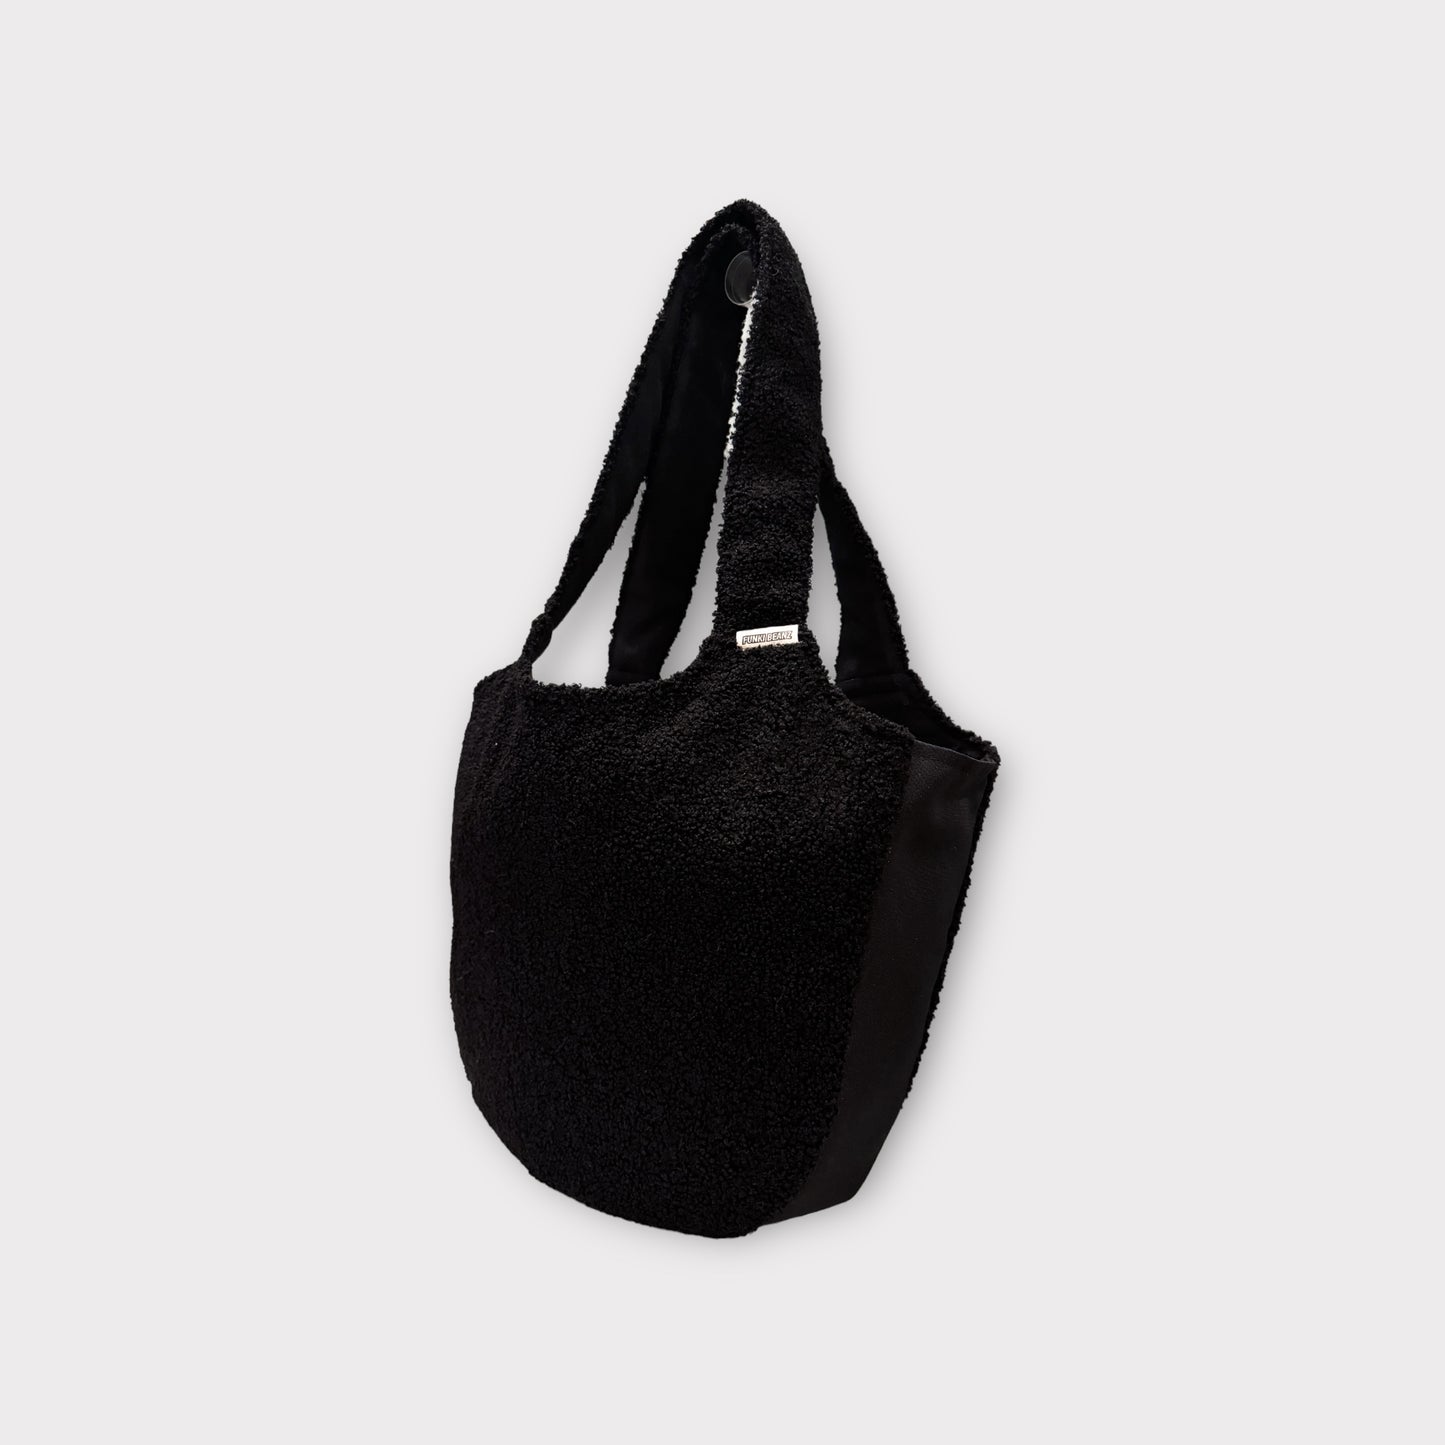 FunkiBeanz Winter Collection #2 - Black Teddy Tote